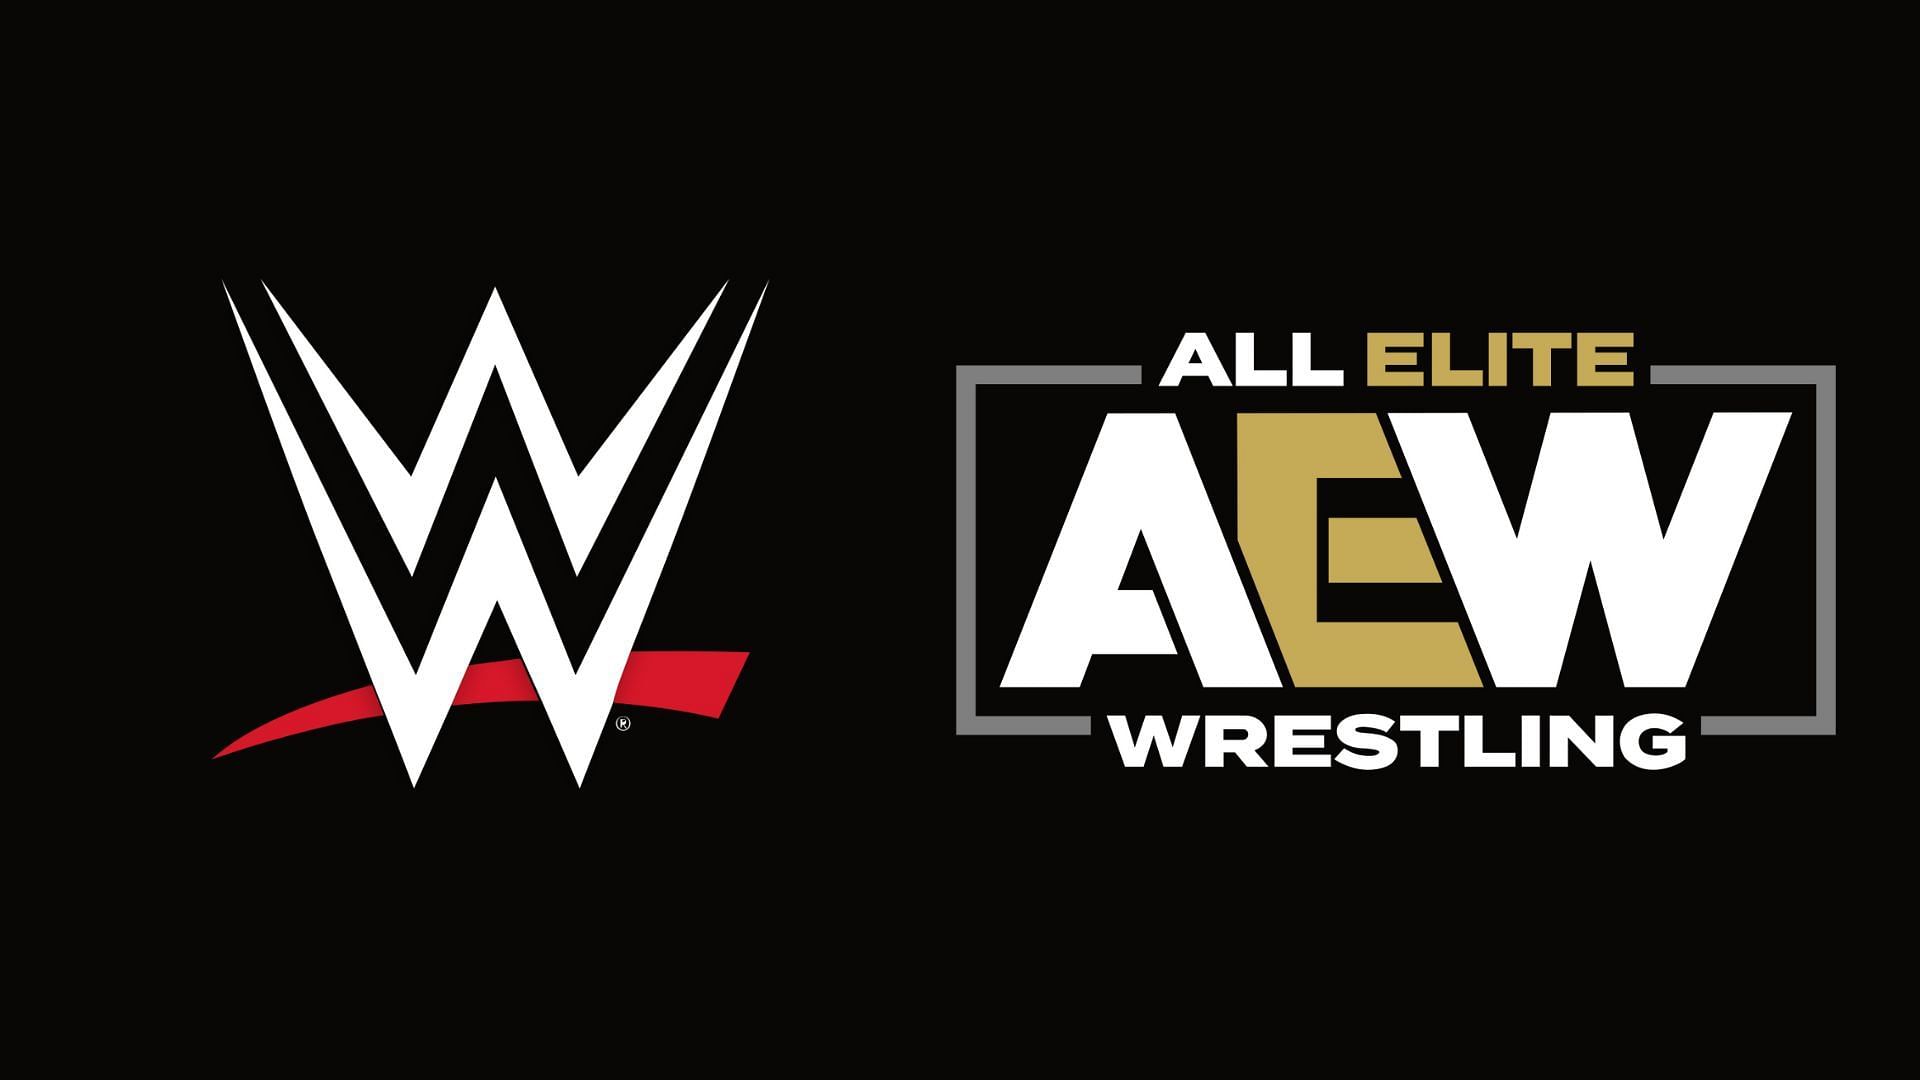 AEW and WWE are mega-players in the wrestling industry.